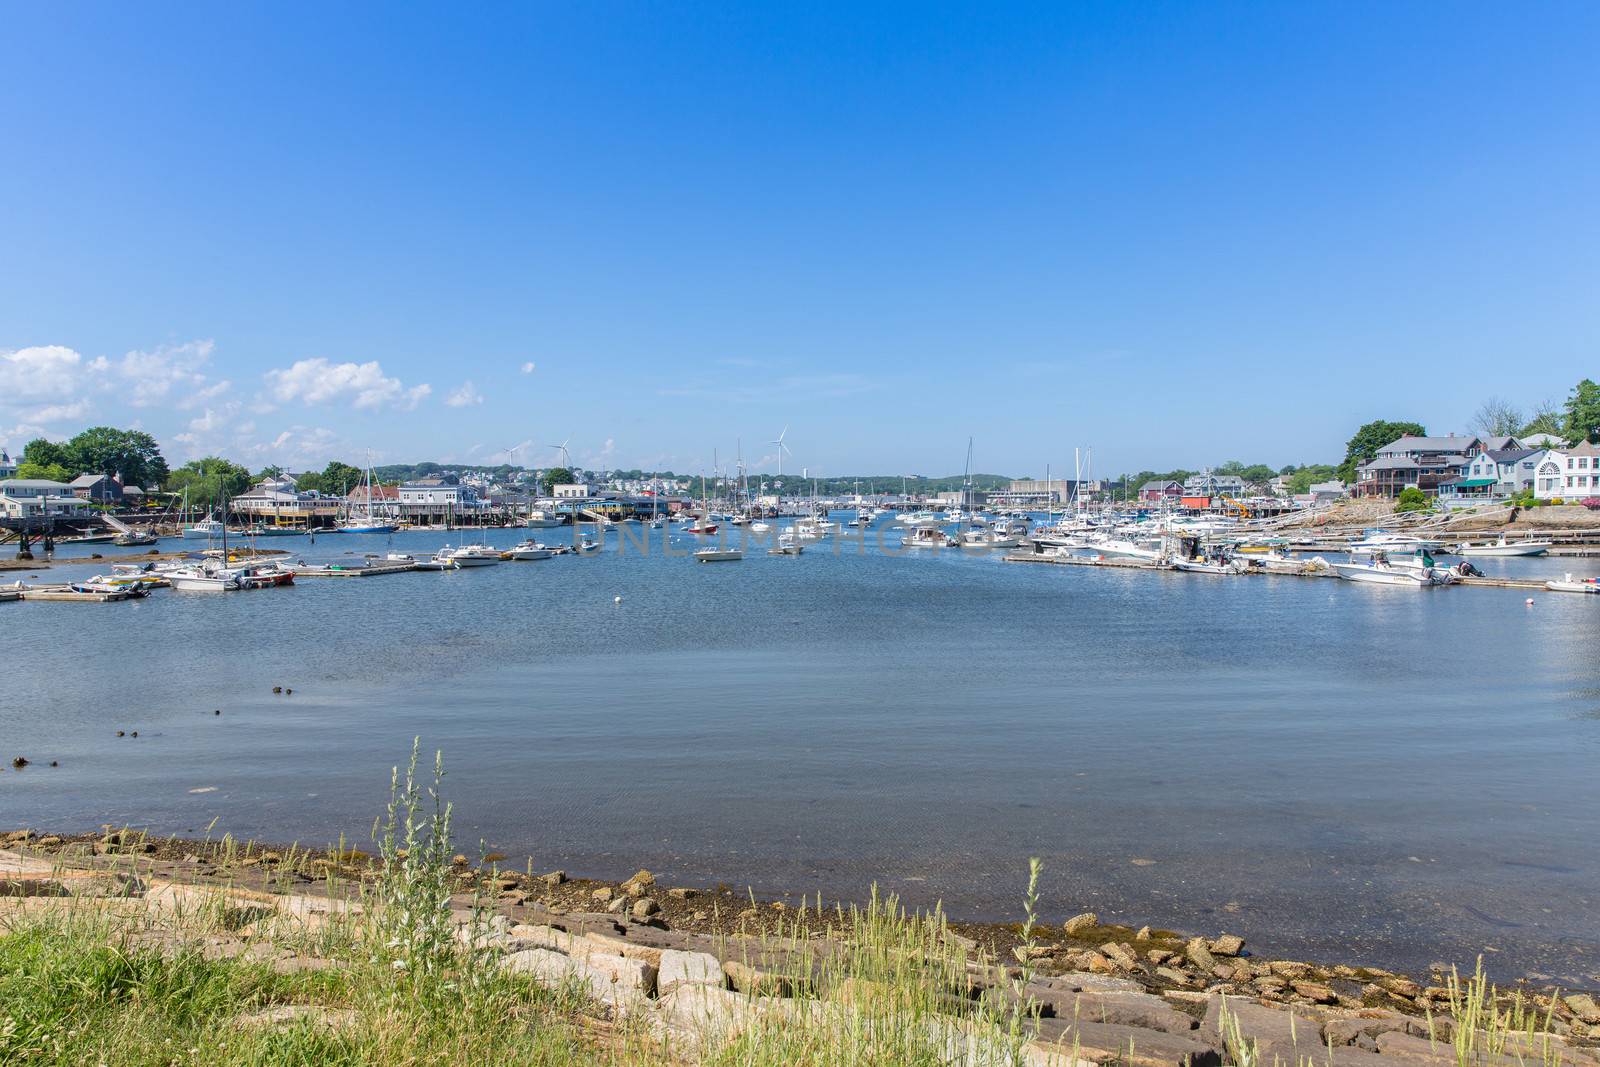 This is a view of Rockport Harbor part of the Gloucester area in Massachusetts.